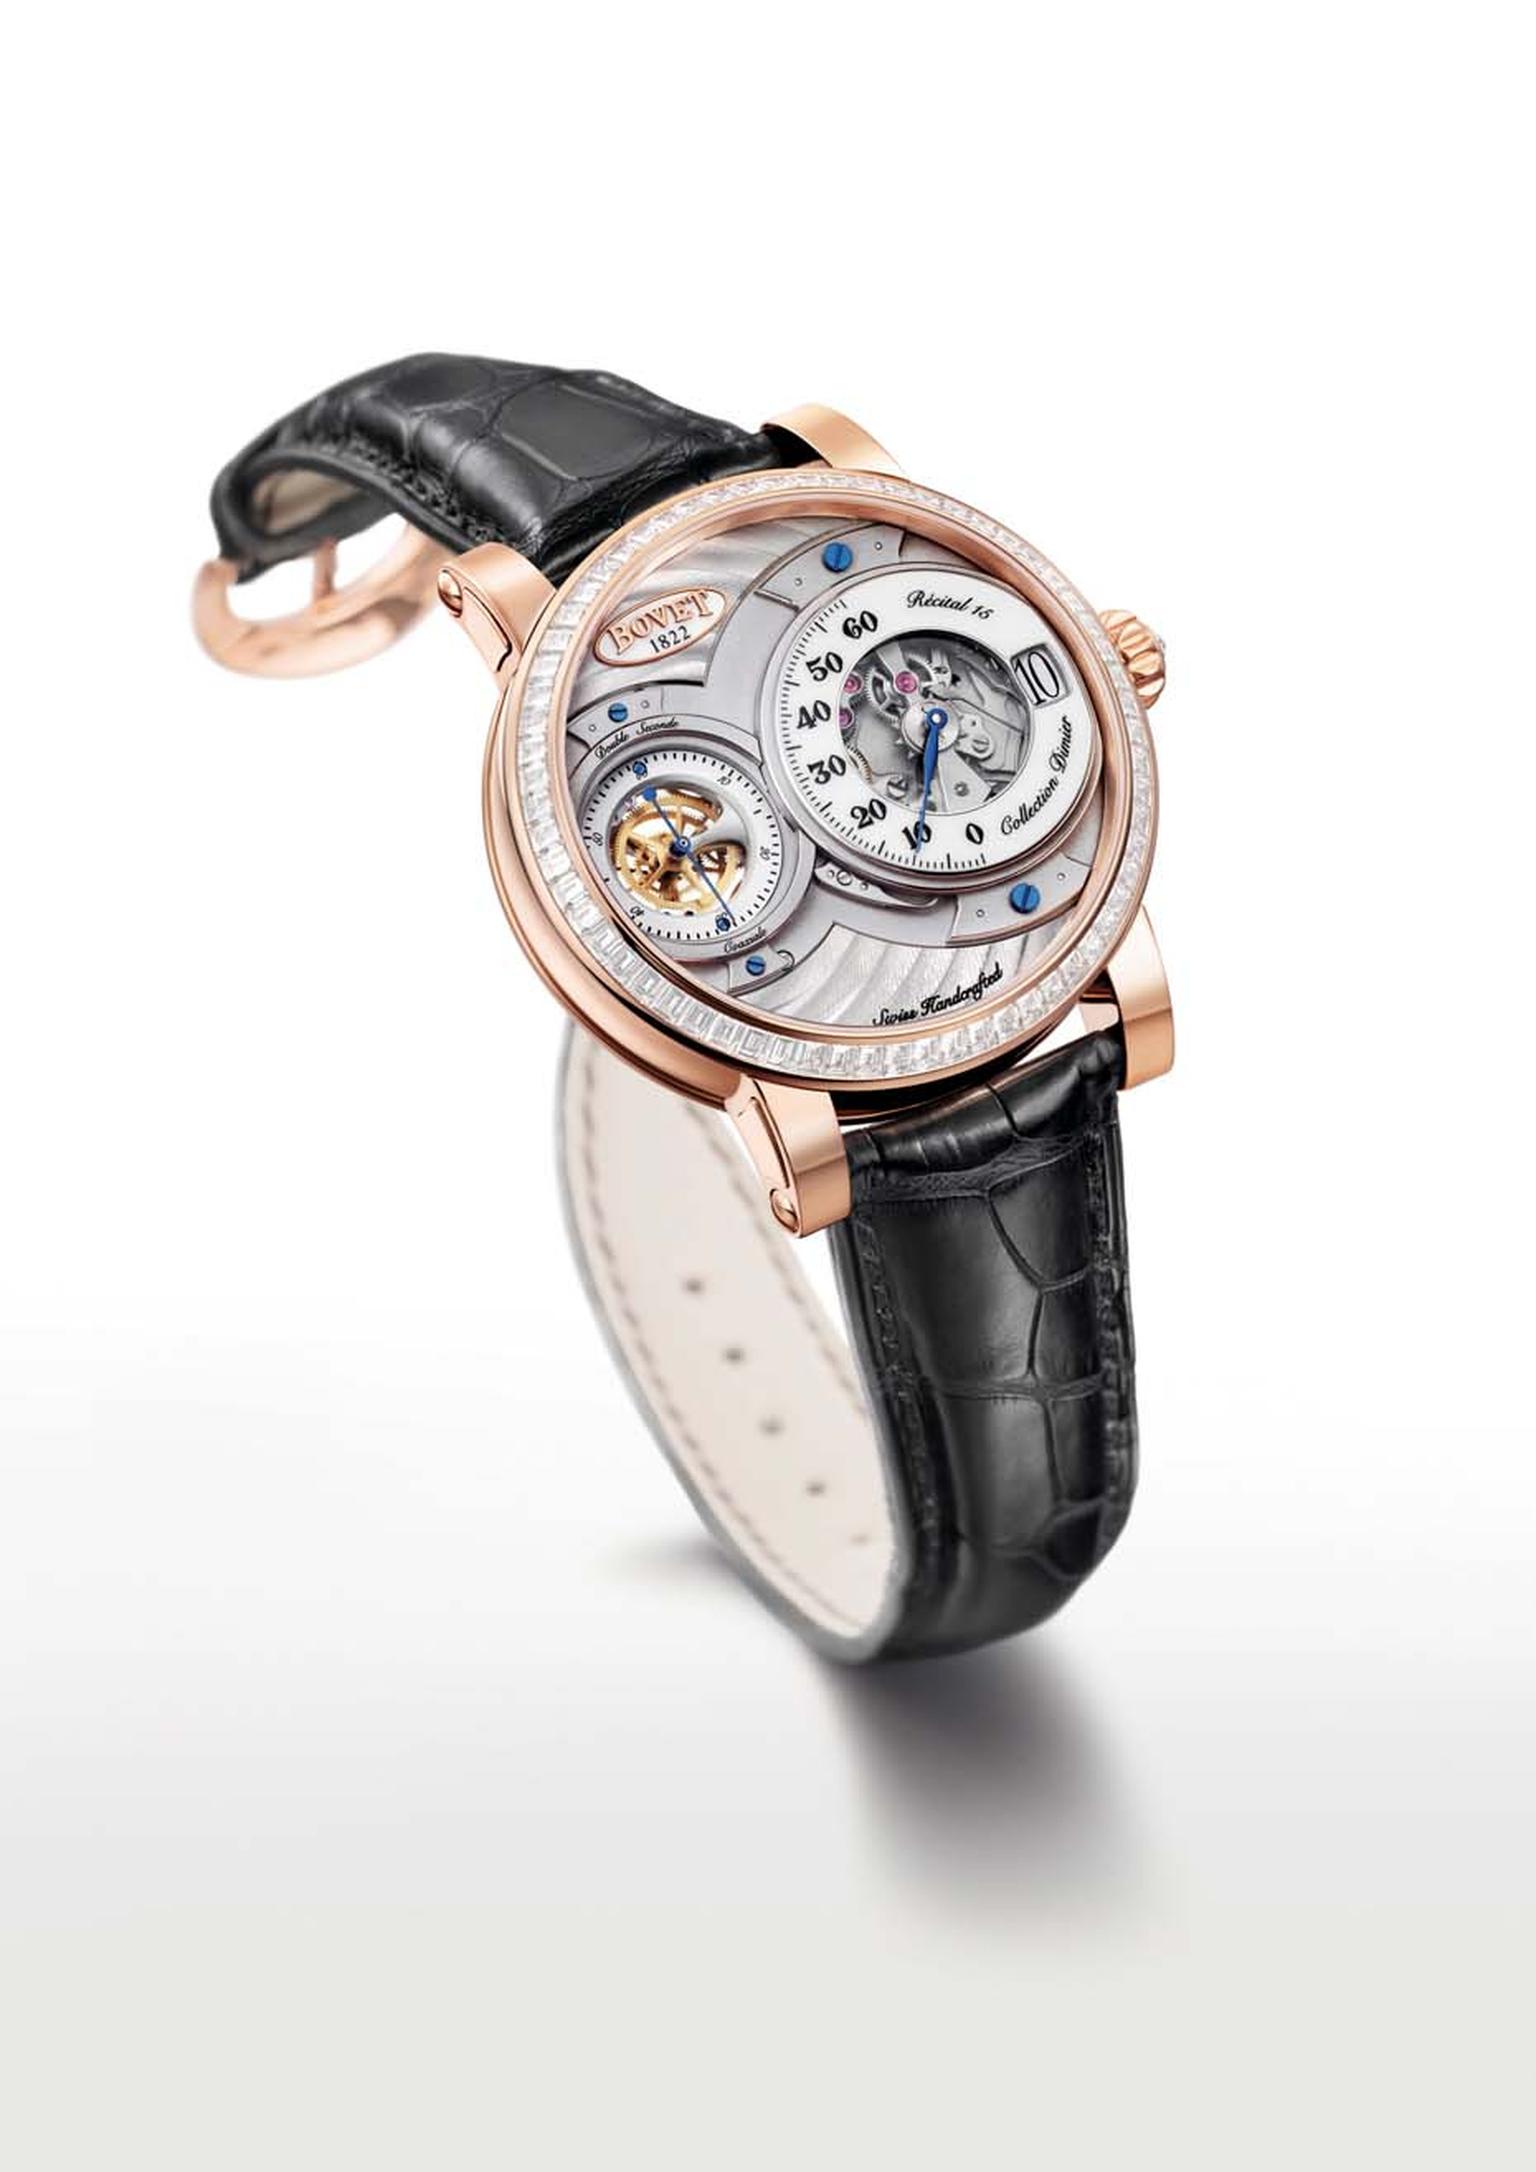 From the new 2014 collection is the Bovet Recital 15 Collection Dimier watch, which combines jumping hours and retrograde minutes, available at the Asprey boutique on New Bond Street.